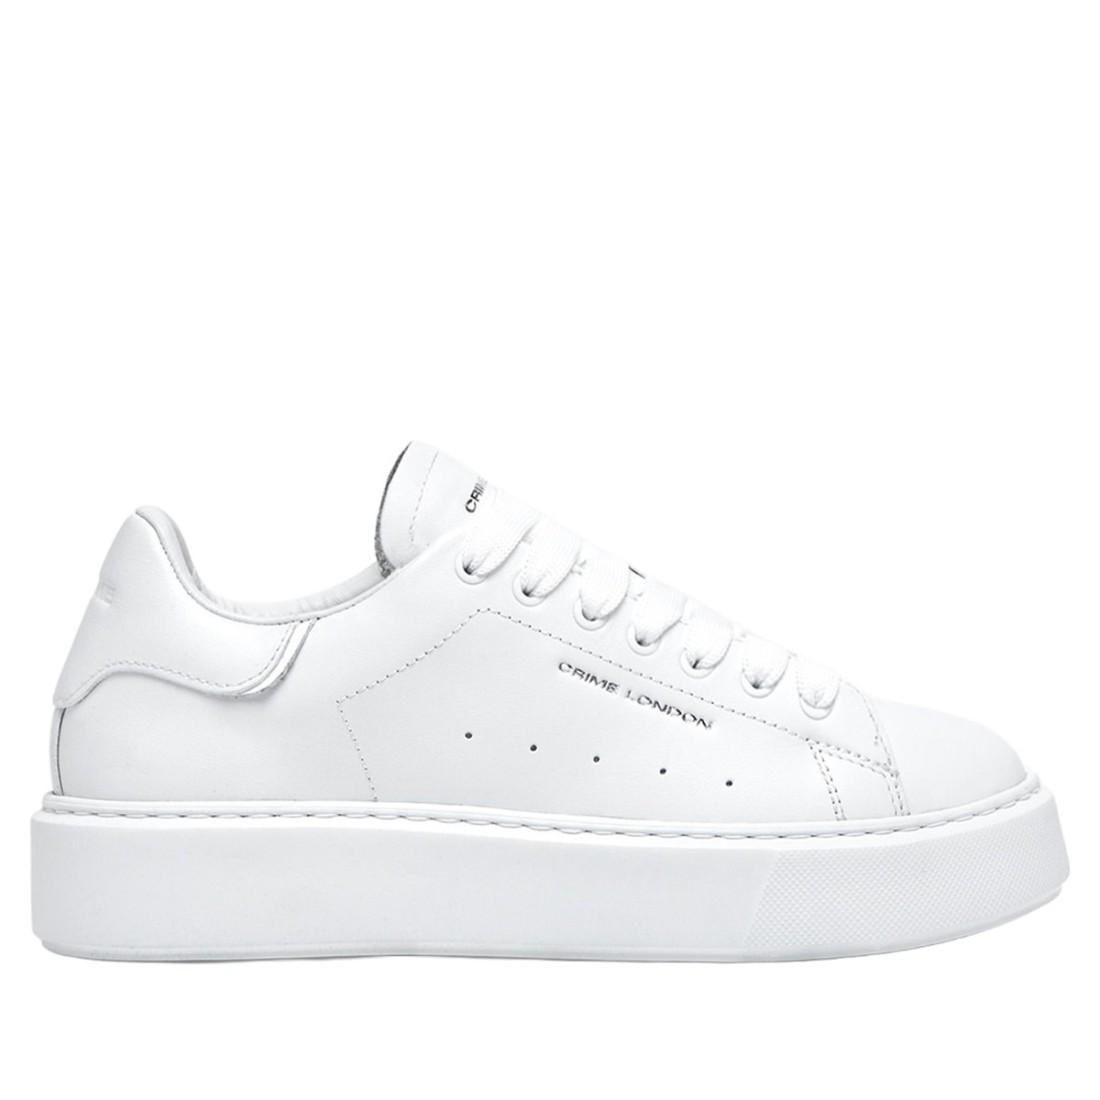 Image of CRIME LONDON - Sneakers Elevate - Colore: Bianco,T